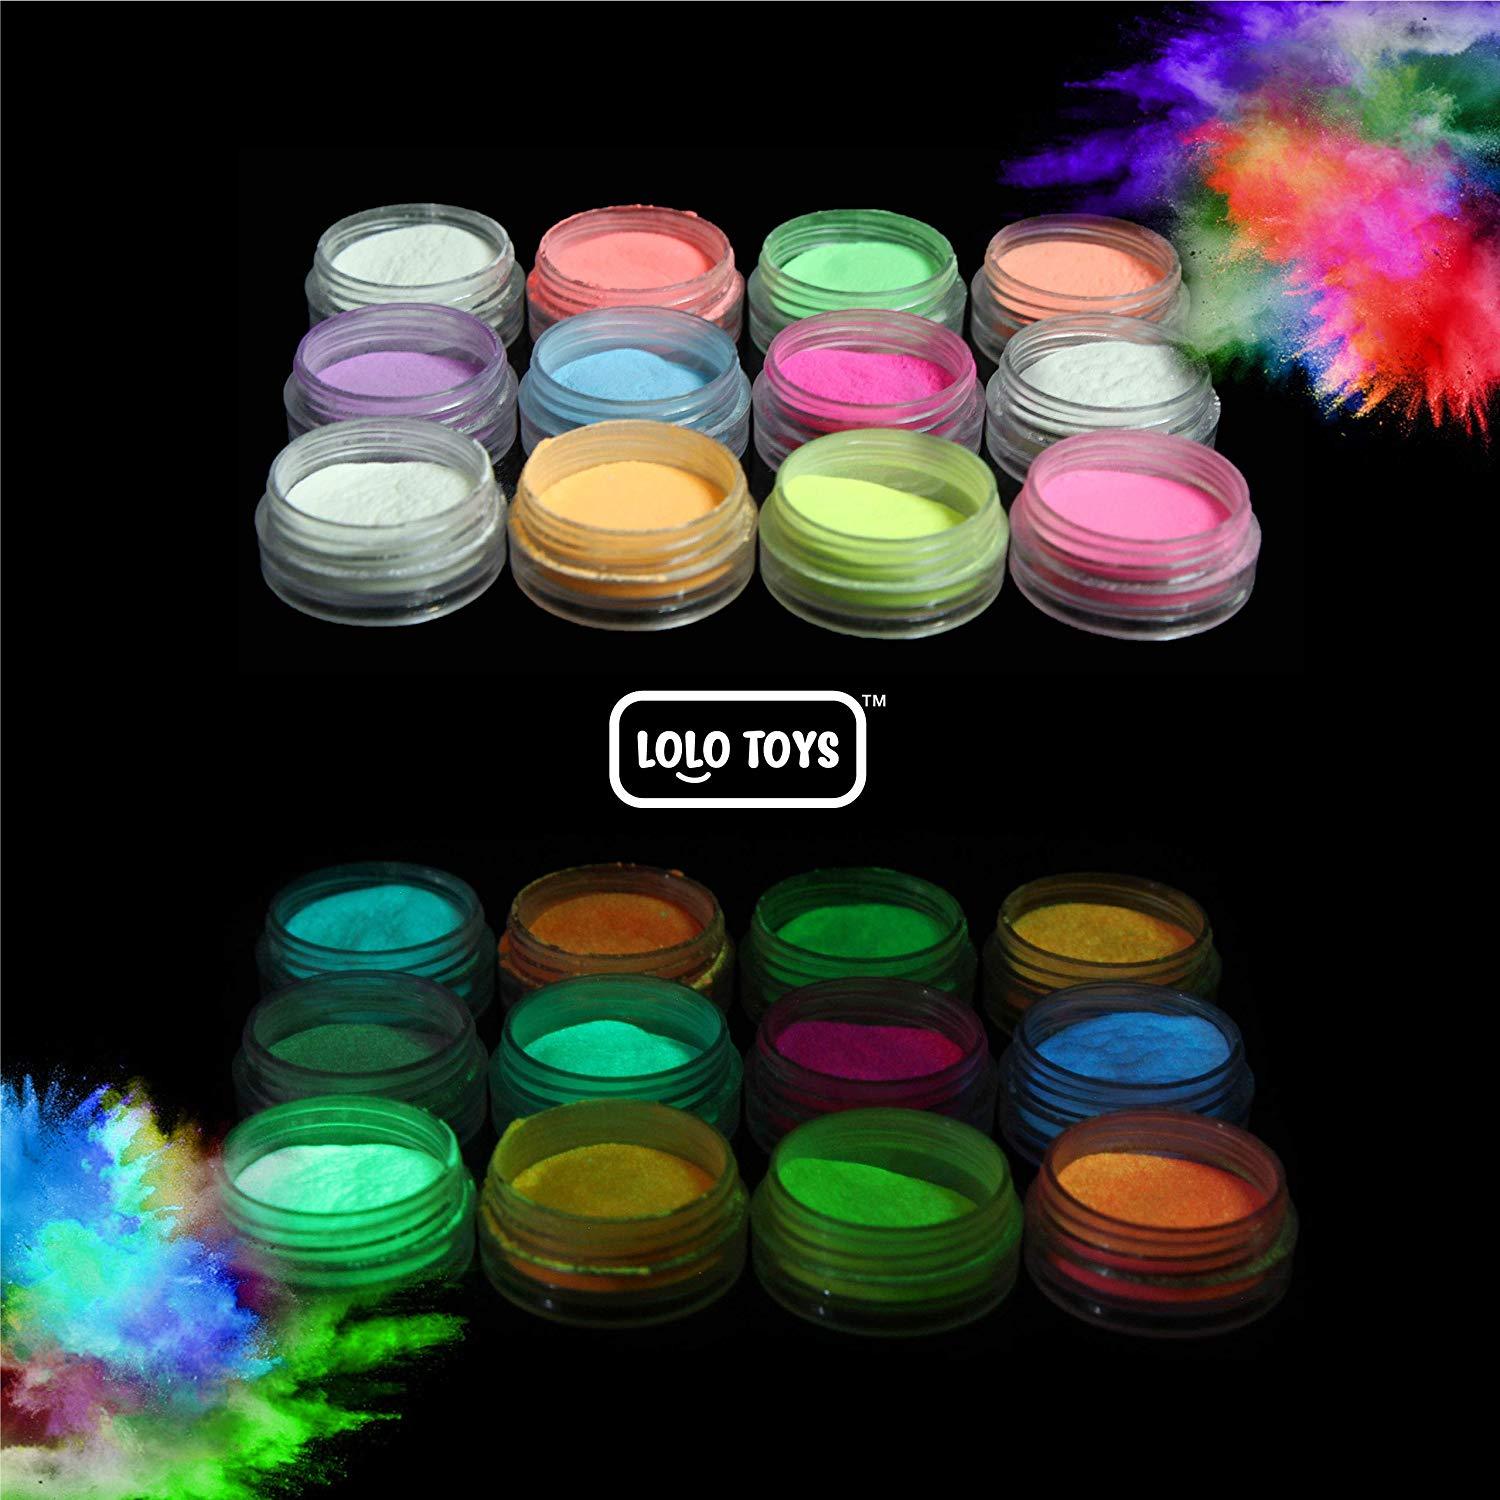 Glow in the Dark Powder - 72 PACK Bulk Party Supplies Favors and Decorations Works Great in addition with Sticks, Necklaces, Glasses, Luminous Pigment Powder Fluorescent UV Neon Dye Dust G - image 3 of 7